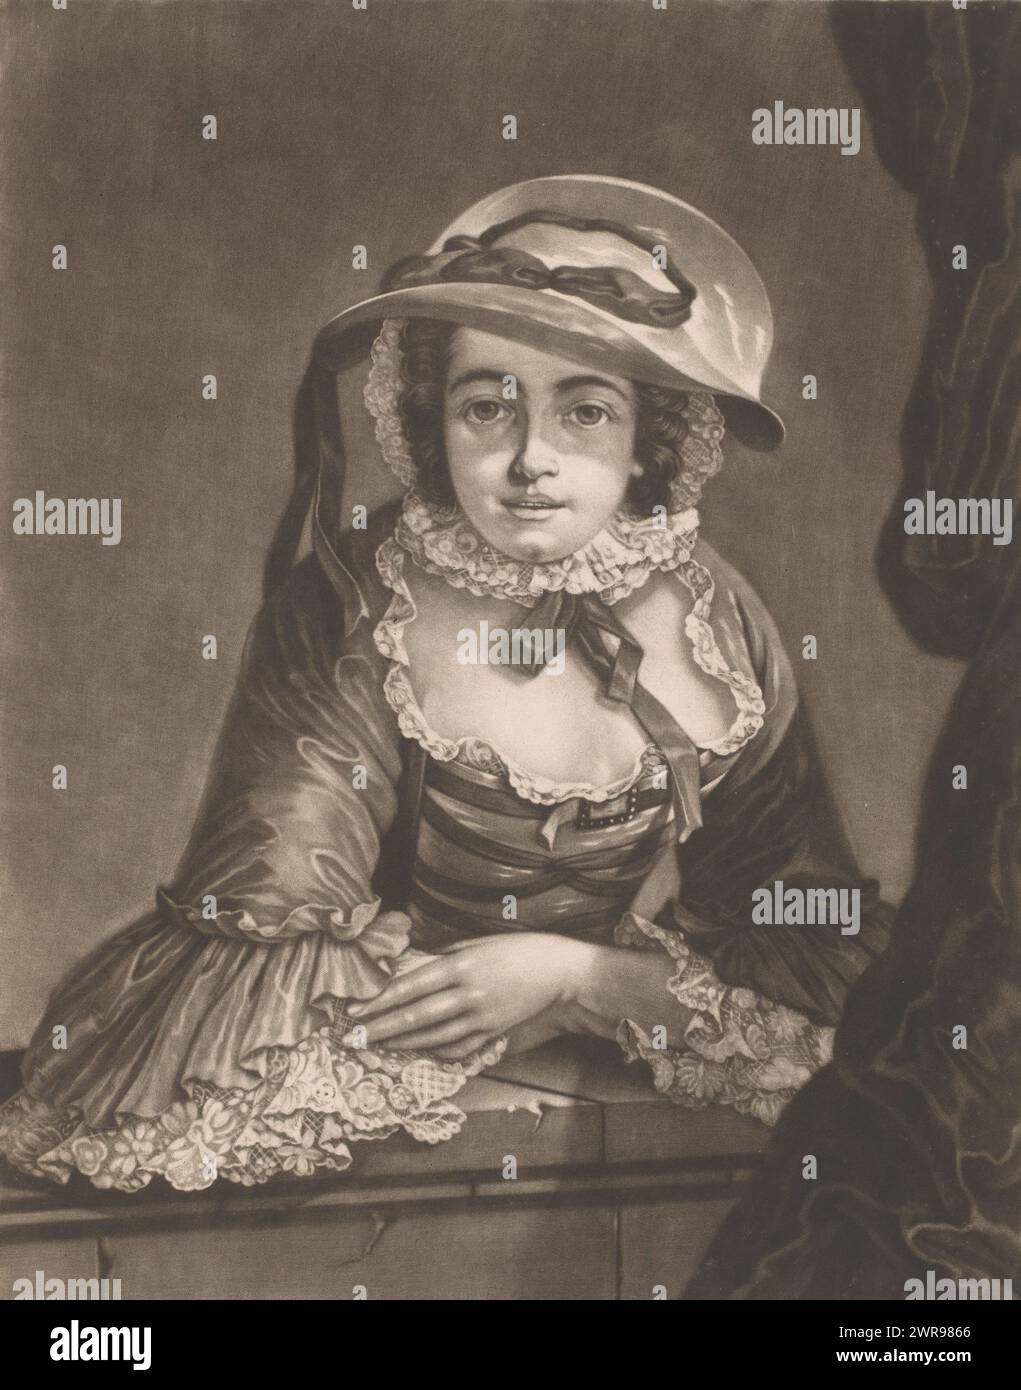 Portrait of Calathea Dawkins, print maker: P. Stee, after painting by: J. Toer, c. 1770 - c. 1780, paper, height 382 mm × width 278 mm, print Stock Photo